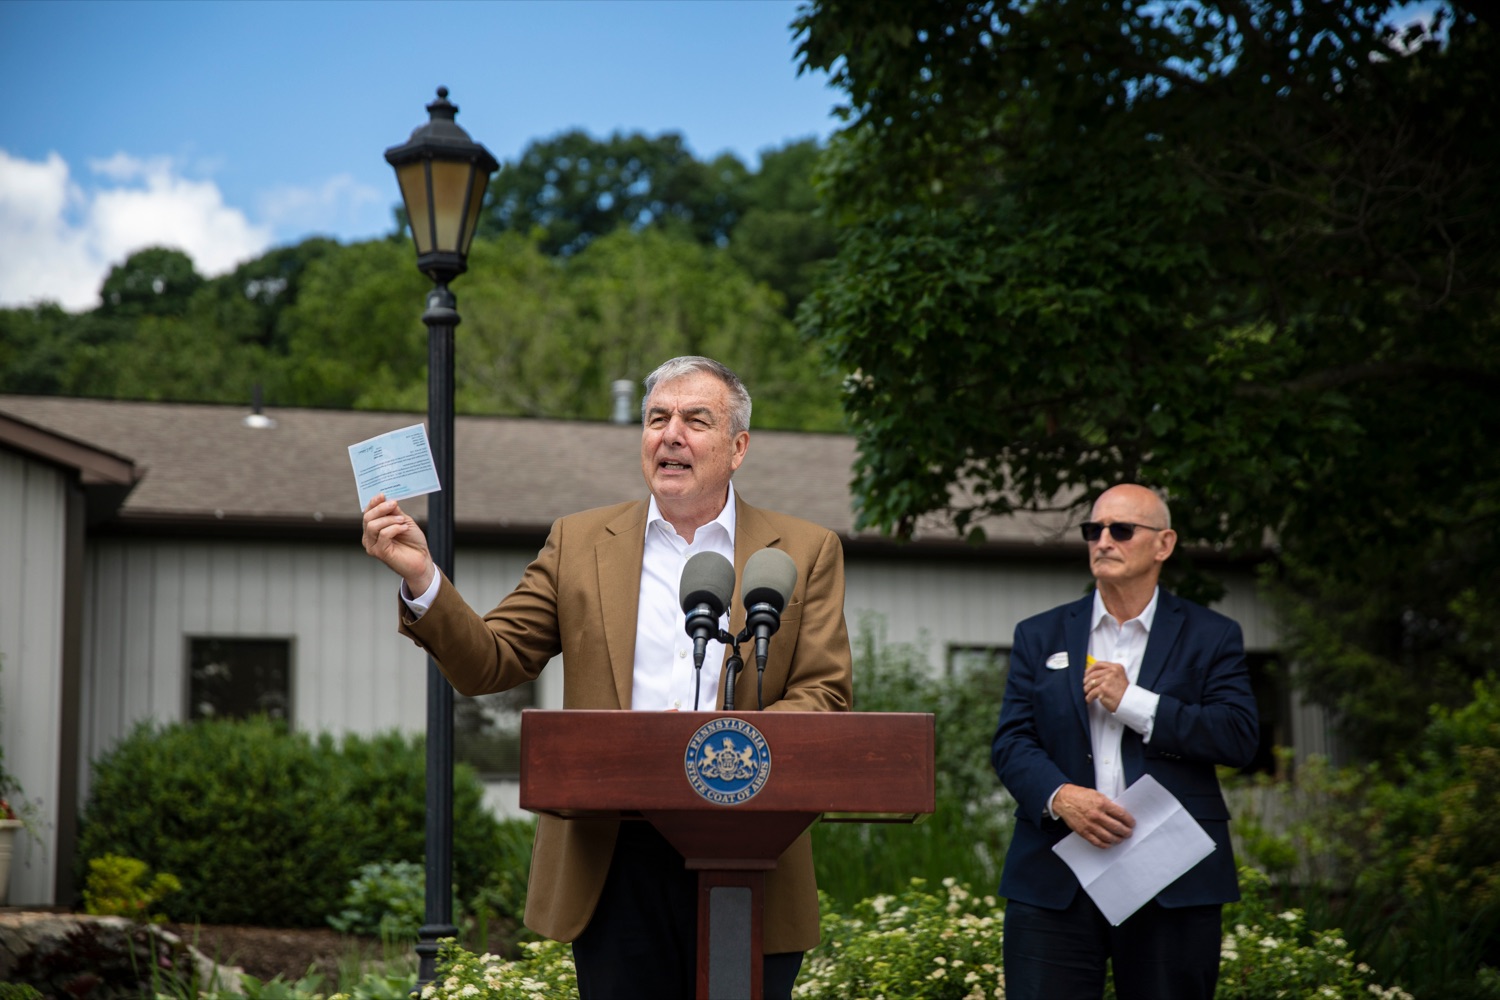 Dan Eichenlaub, president of Eichenlaub, Inc., speaks during a press conference, which provided an update on the state of spotted lanternfly in Pennsylvania and the path to beating this invasive specie, at Eichenlaub Inc. in Allegheny County, on Tuesday, June 22, 2021.<br><a href="https://filesource.amperwave.net/commonwealthofpa/photo/18842_AGRIC_SLF_NK_015.jpg" target="_blank">⇣ Download Photo</a>